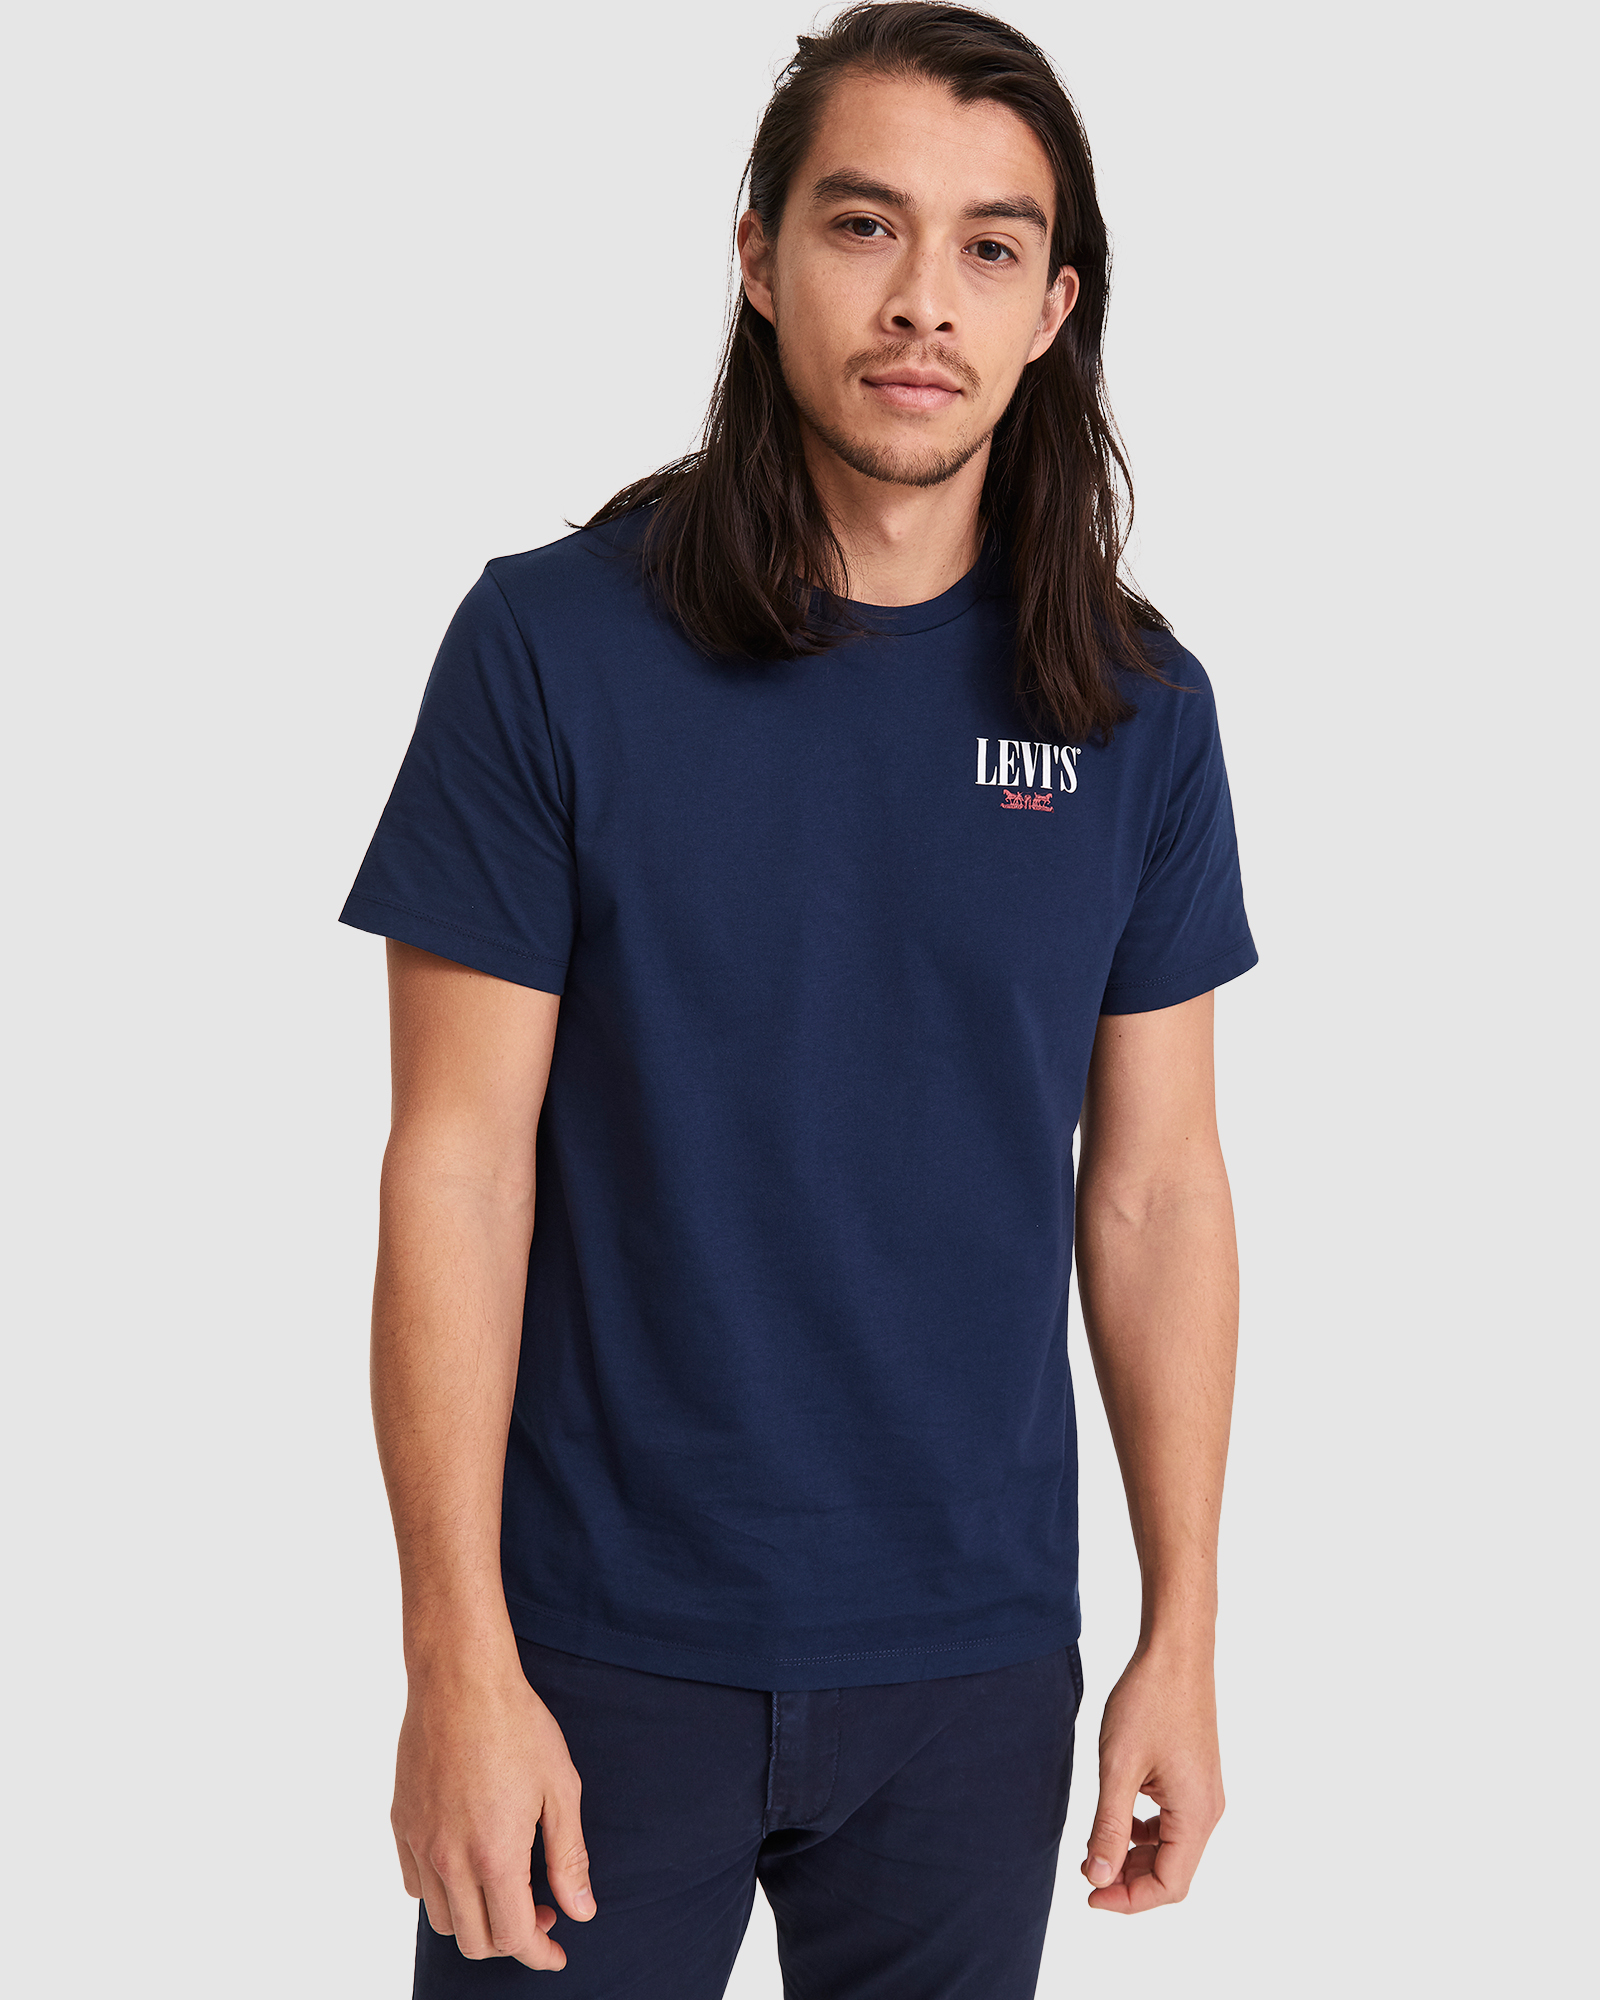 Mens Graphic Crewneck Tee 2hp Ssnl by LEVIS | Amazon Surf